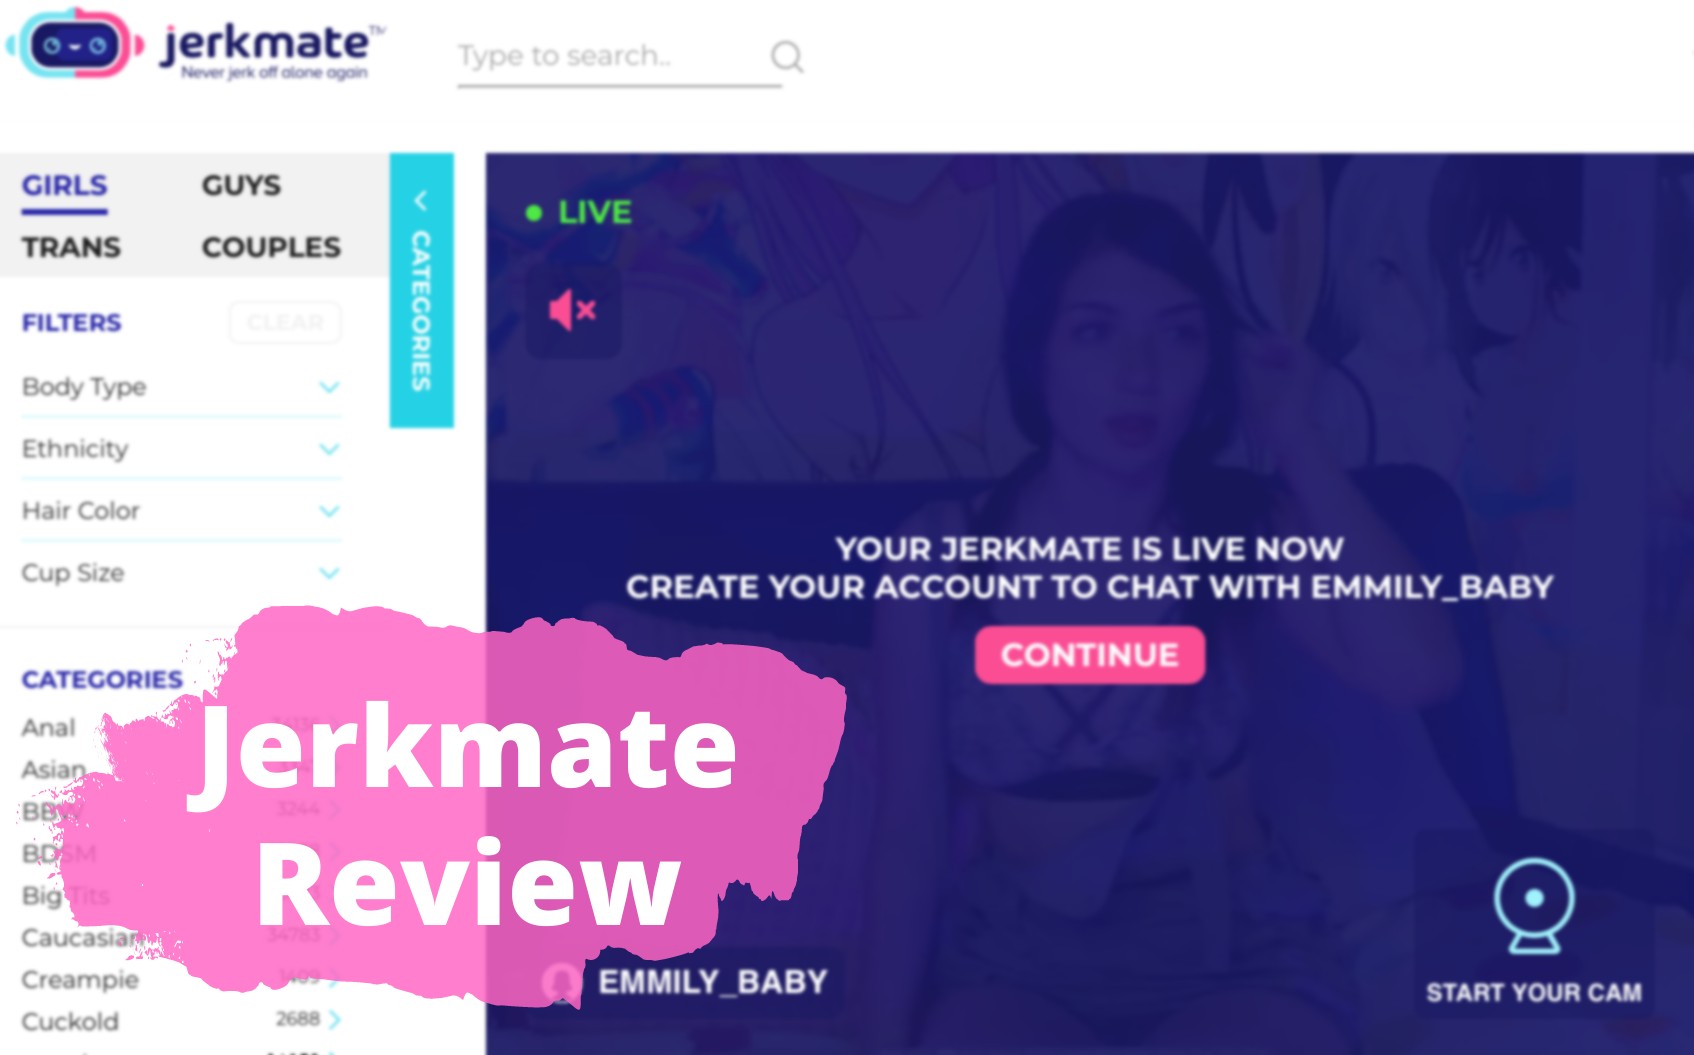 Jerkmate Review Is Their Membership Worth Using? My experience with the uber popular cam site, Jerkmate